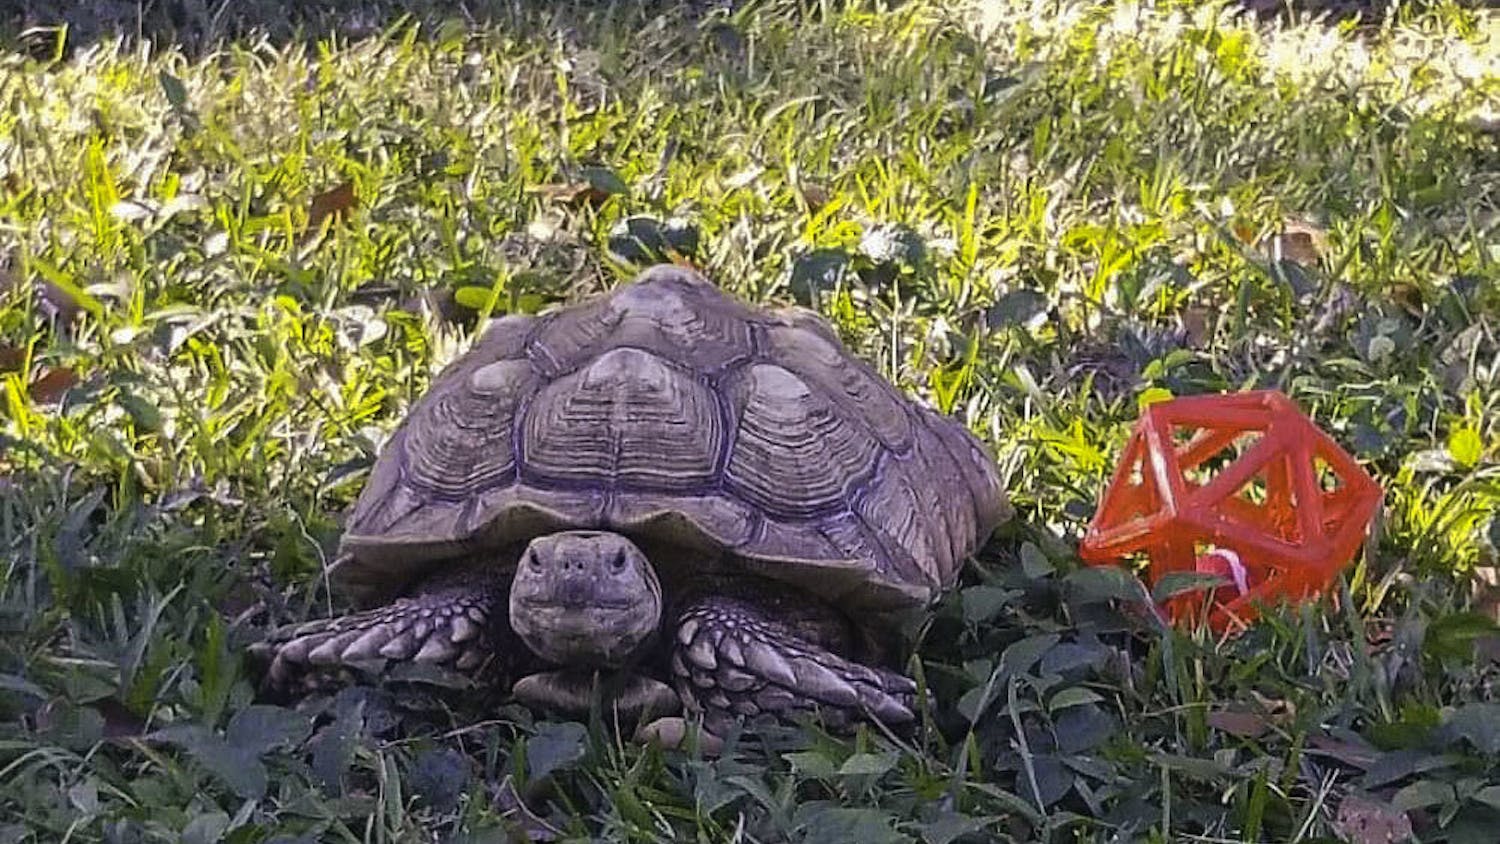 The UF Small Animal Hospital discovered that Nancy, a sulcata tortoise, is allergic to orchardgrass hay.